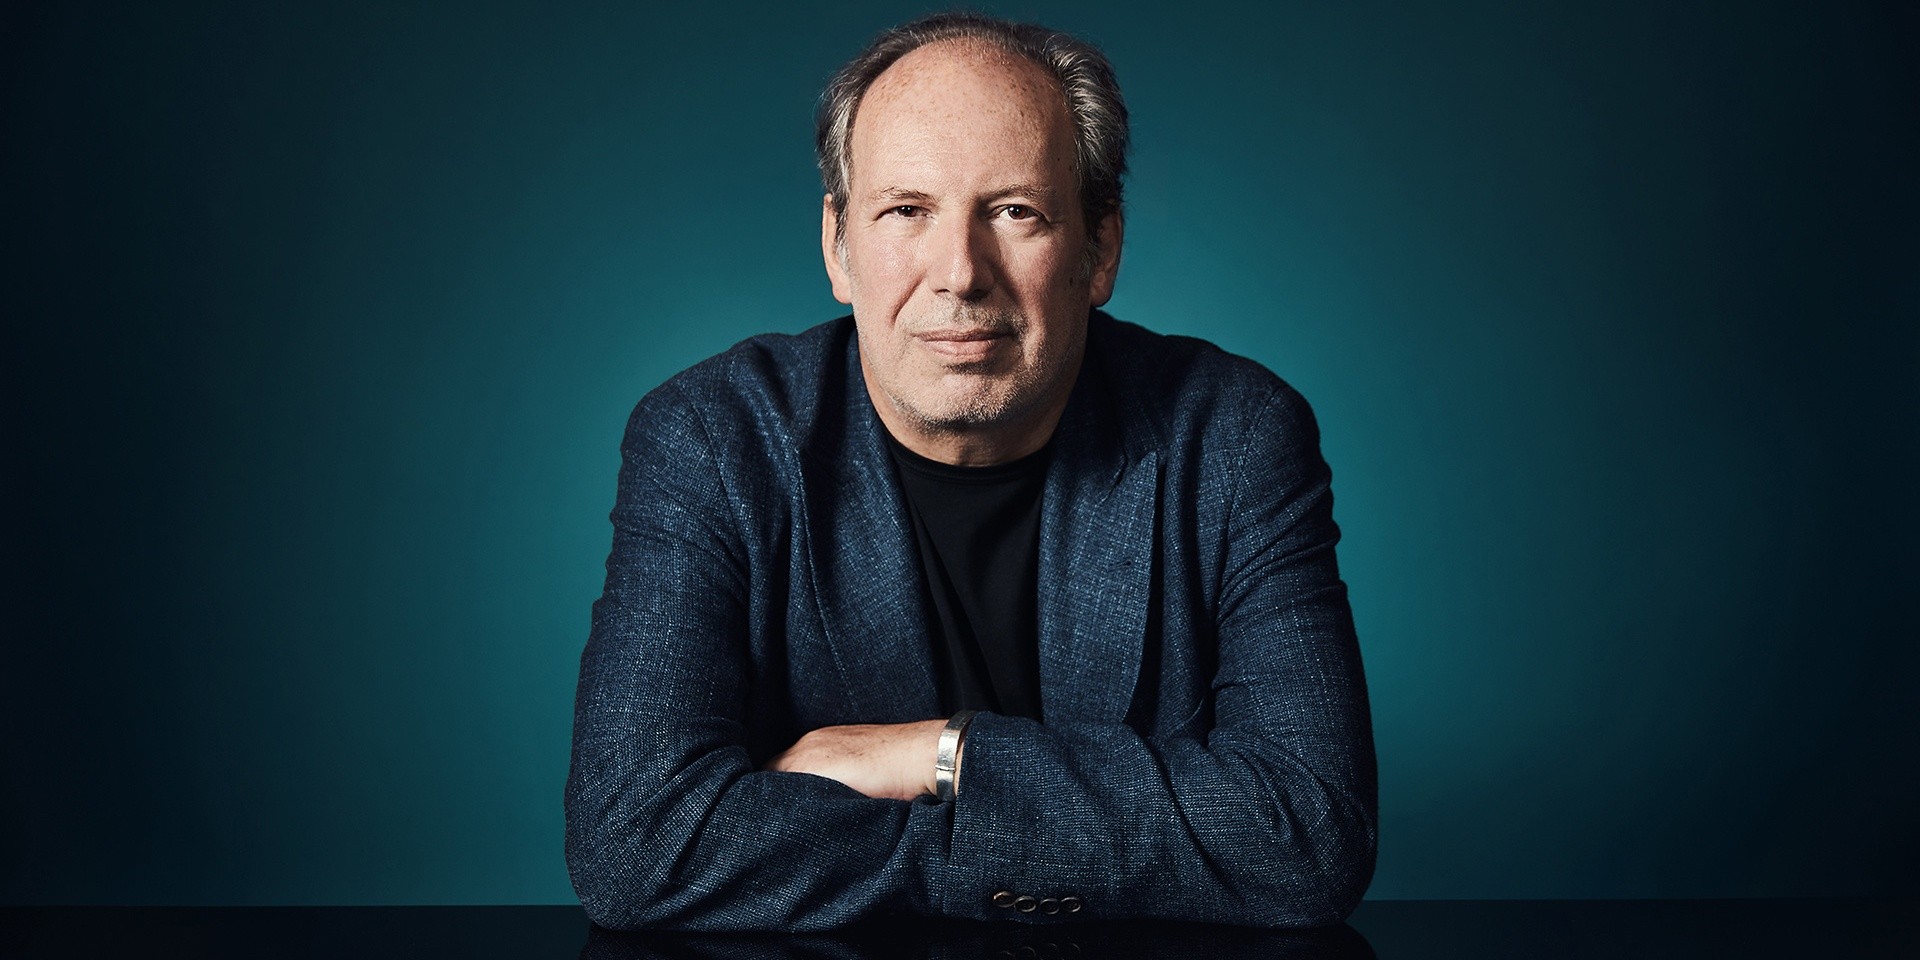 Sony Music and YouTube launch Hans Zimmer music video competition – open to creators worldwide